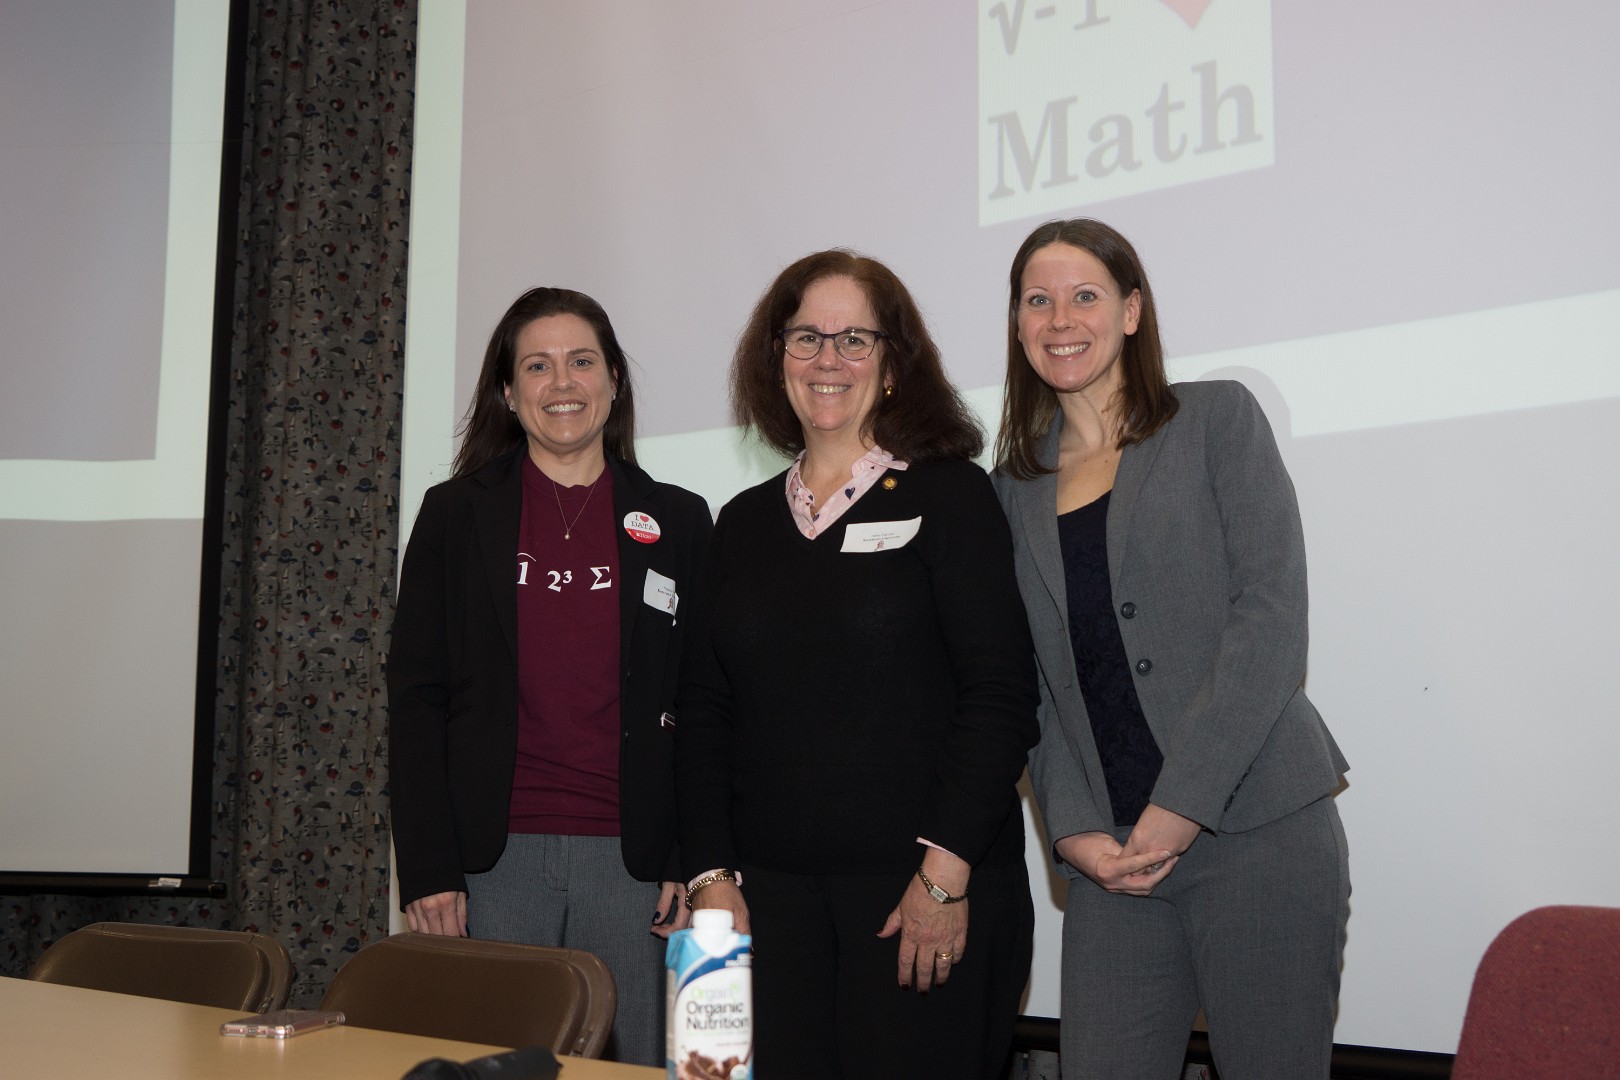 Presenters from 2017 smiling at a conference in front of a slide that says "I heart math"